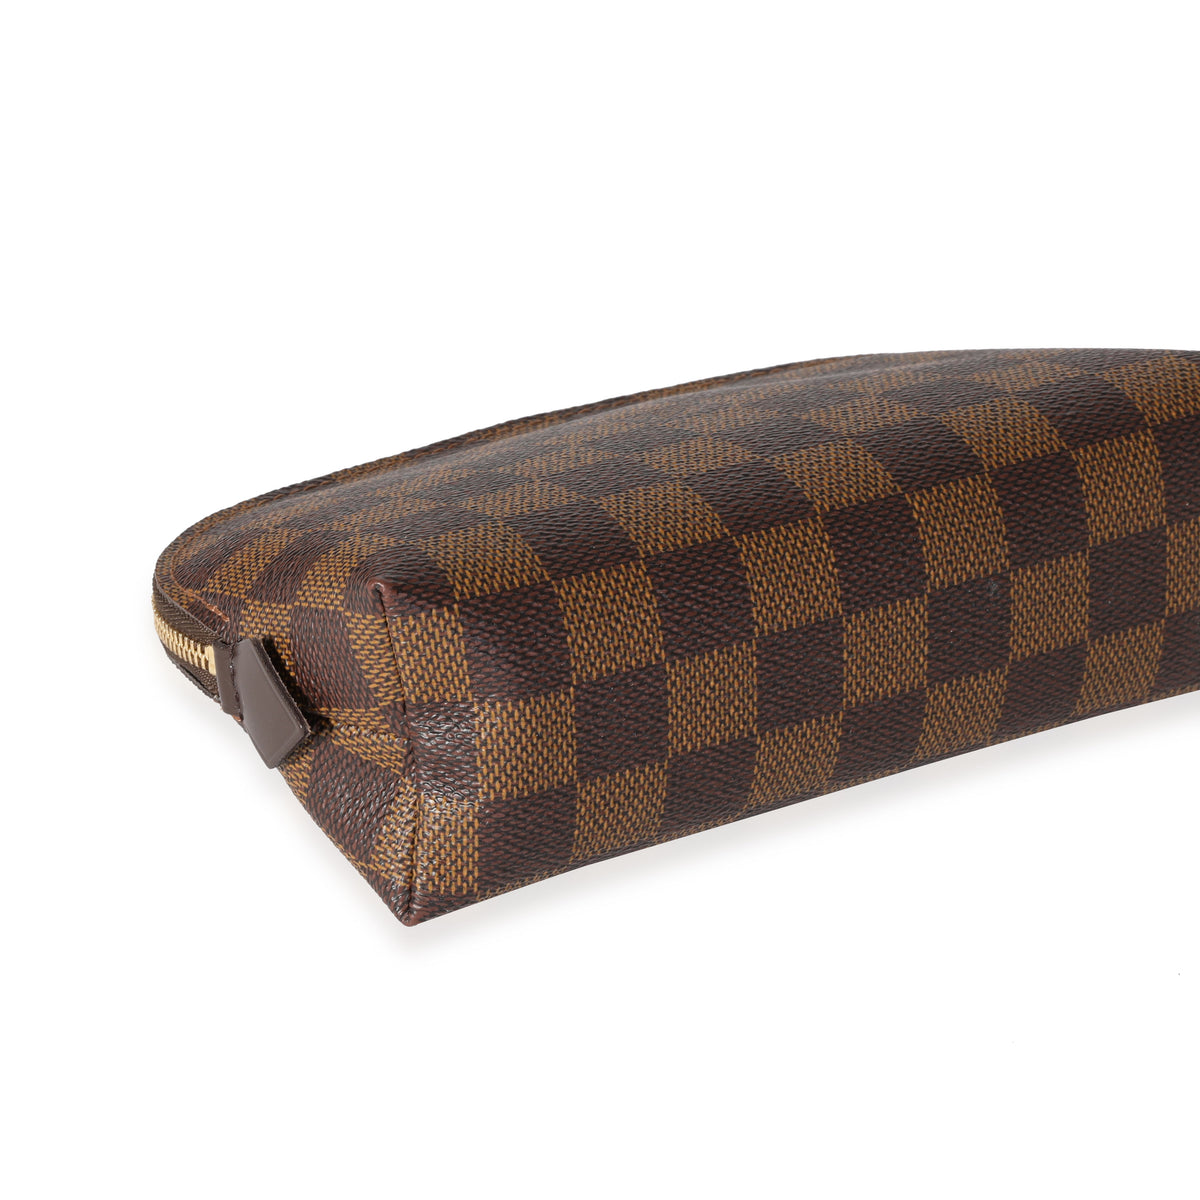 Louis Vuitton Damier Ebene Cosmetic Pouch PM - Brown Cosmetic Bags,  Accessories - LOU805327